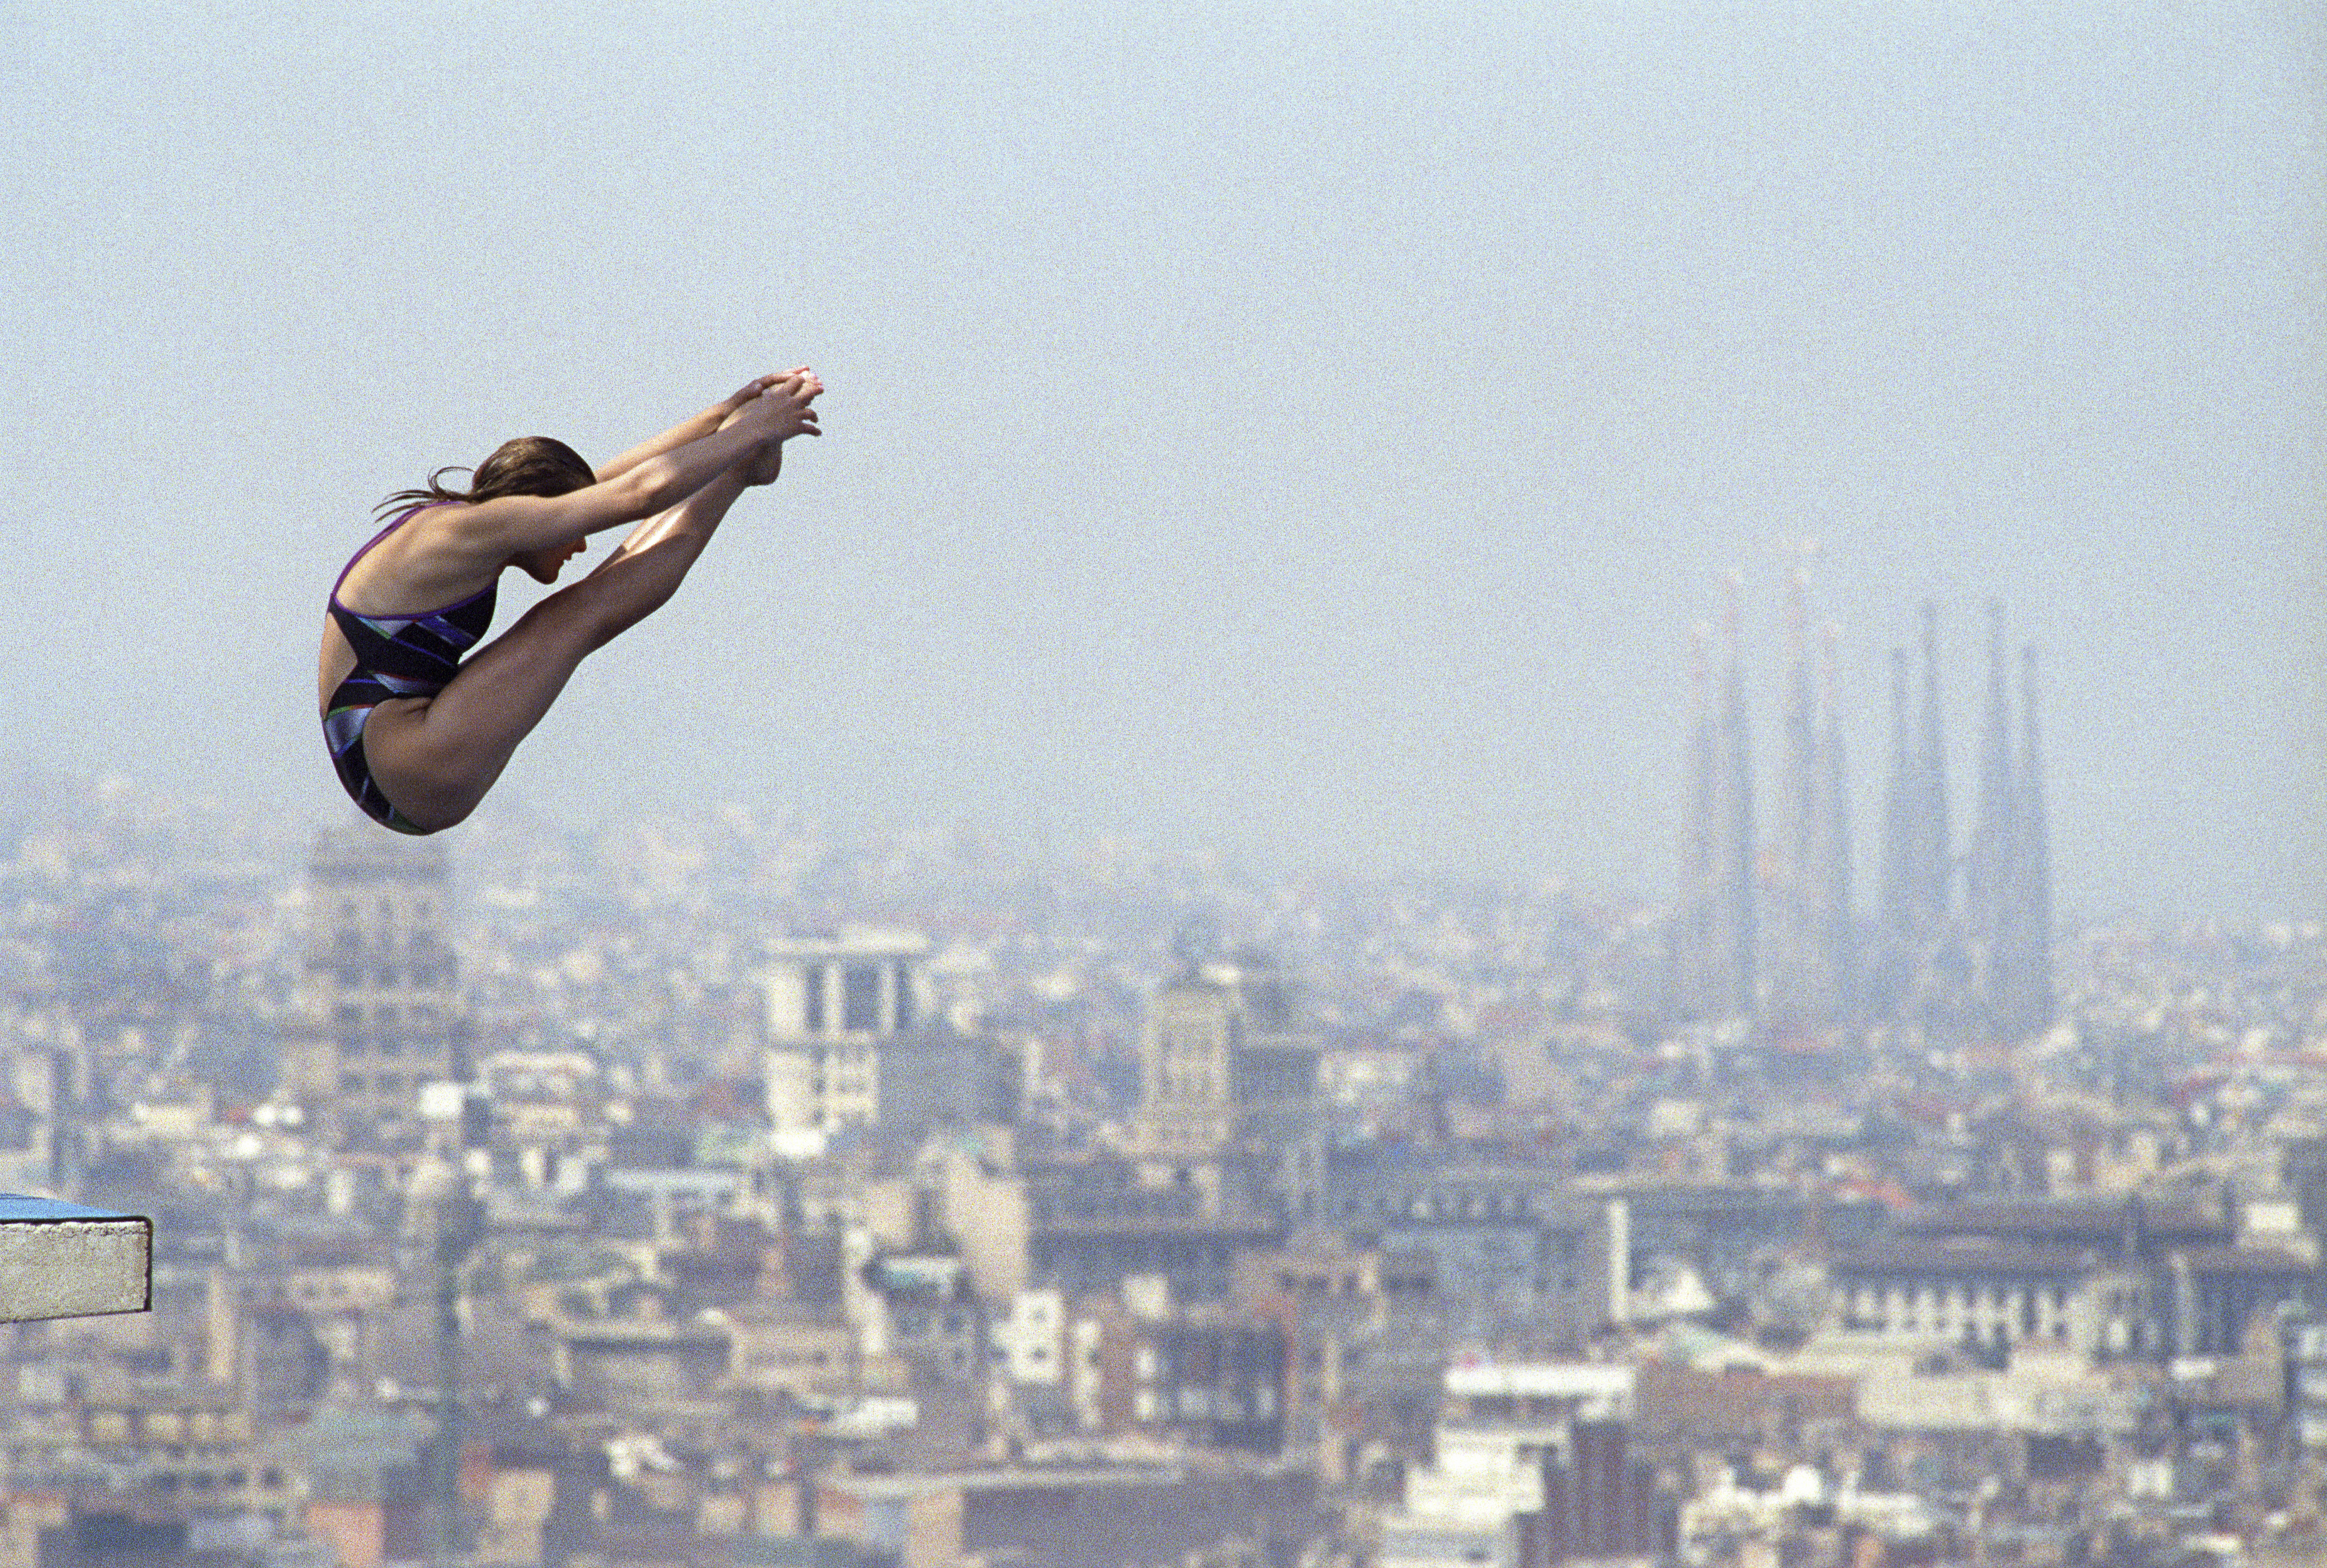 A trampoline jumper during the 10-meter diving event at the 1992 Barcelona Olympic Games. In the background, the city of Barcelona and the temple of the Sagrada Familia. EFE/Txema Fernandez/File